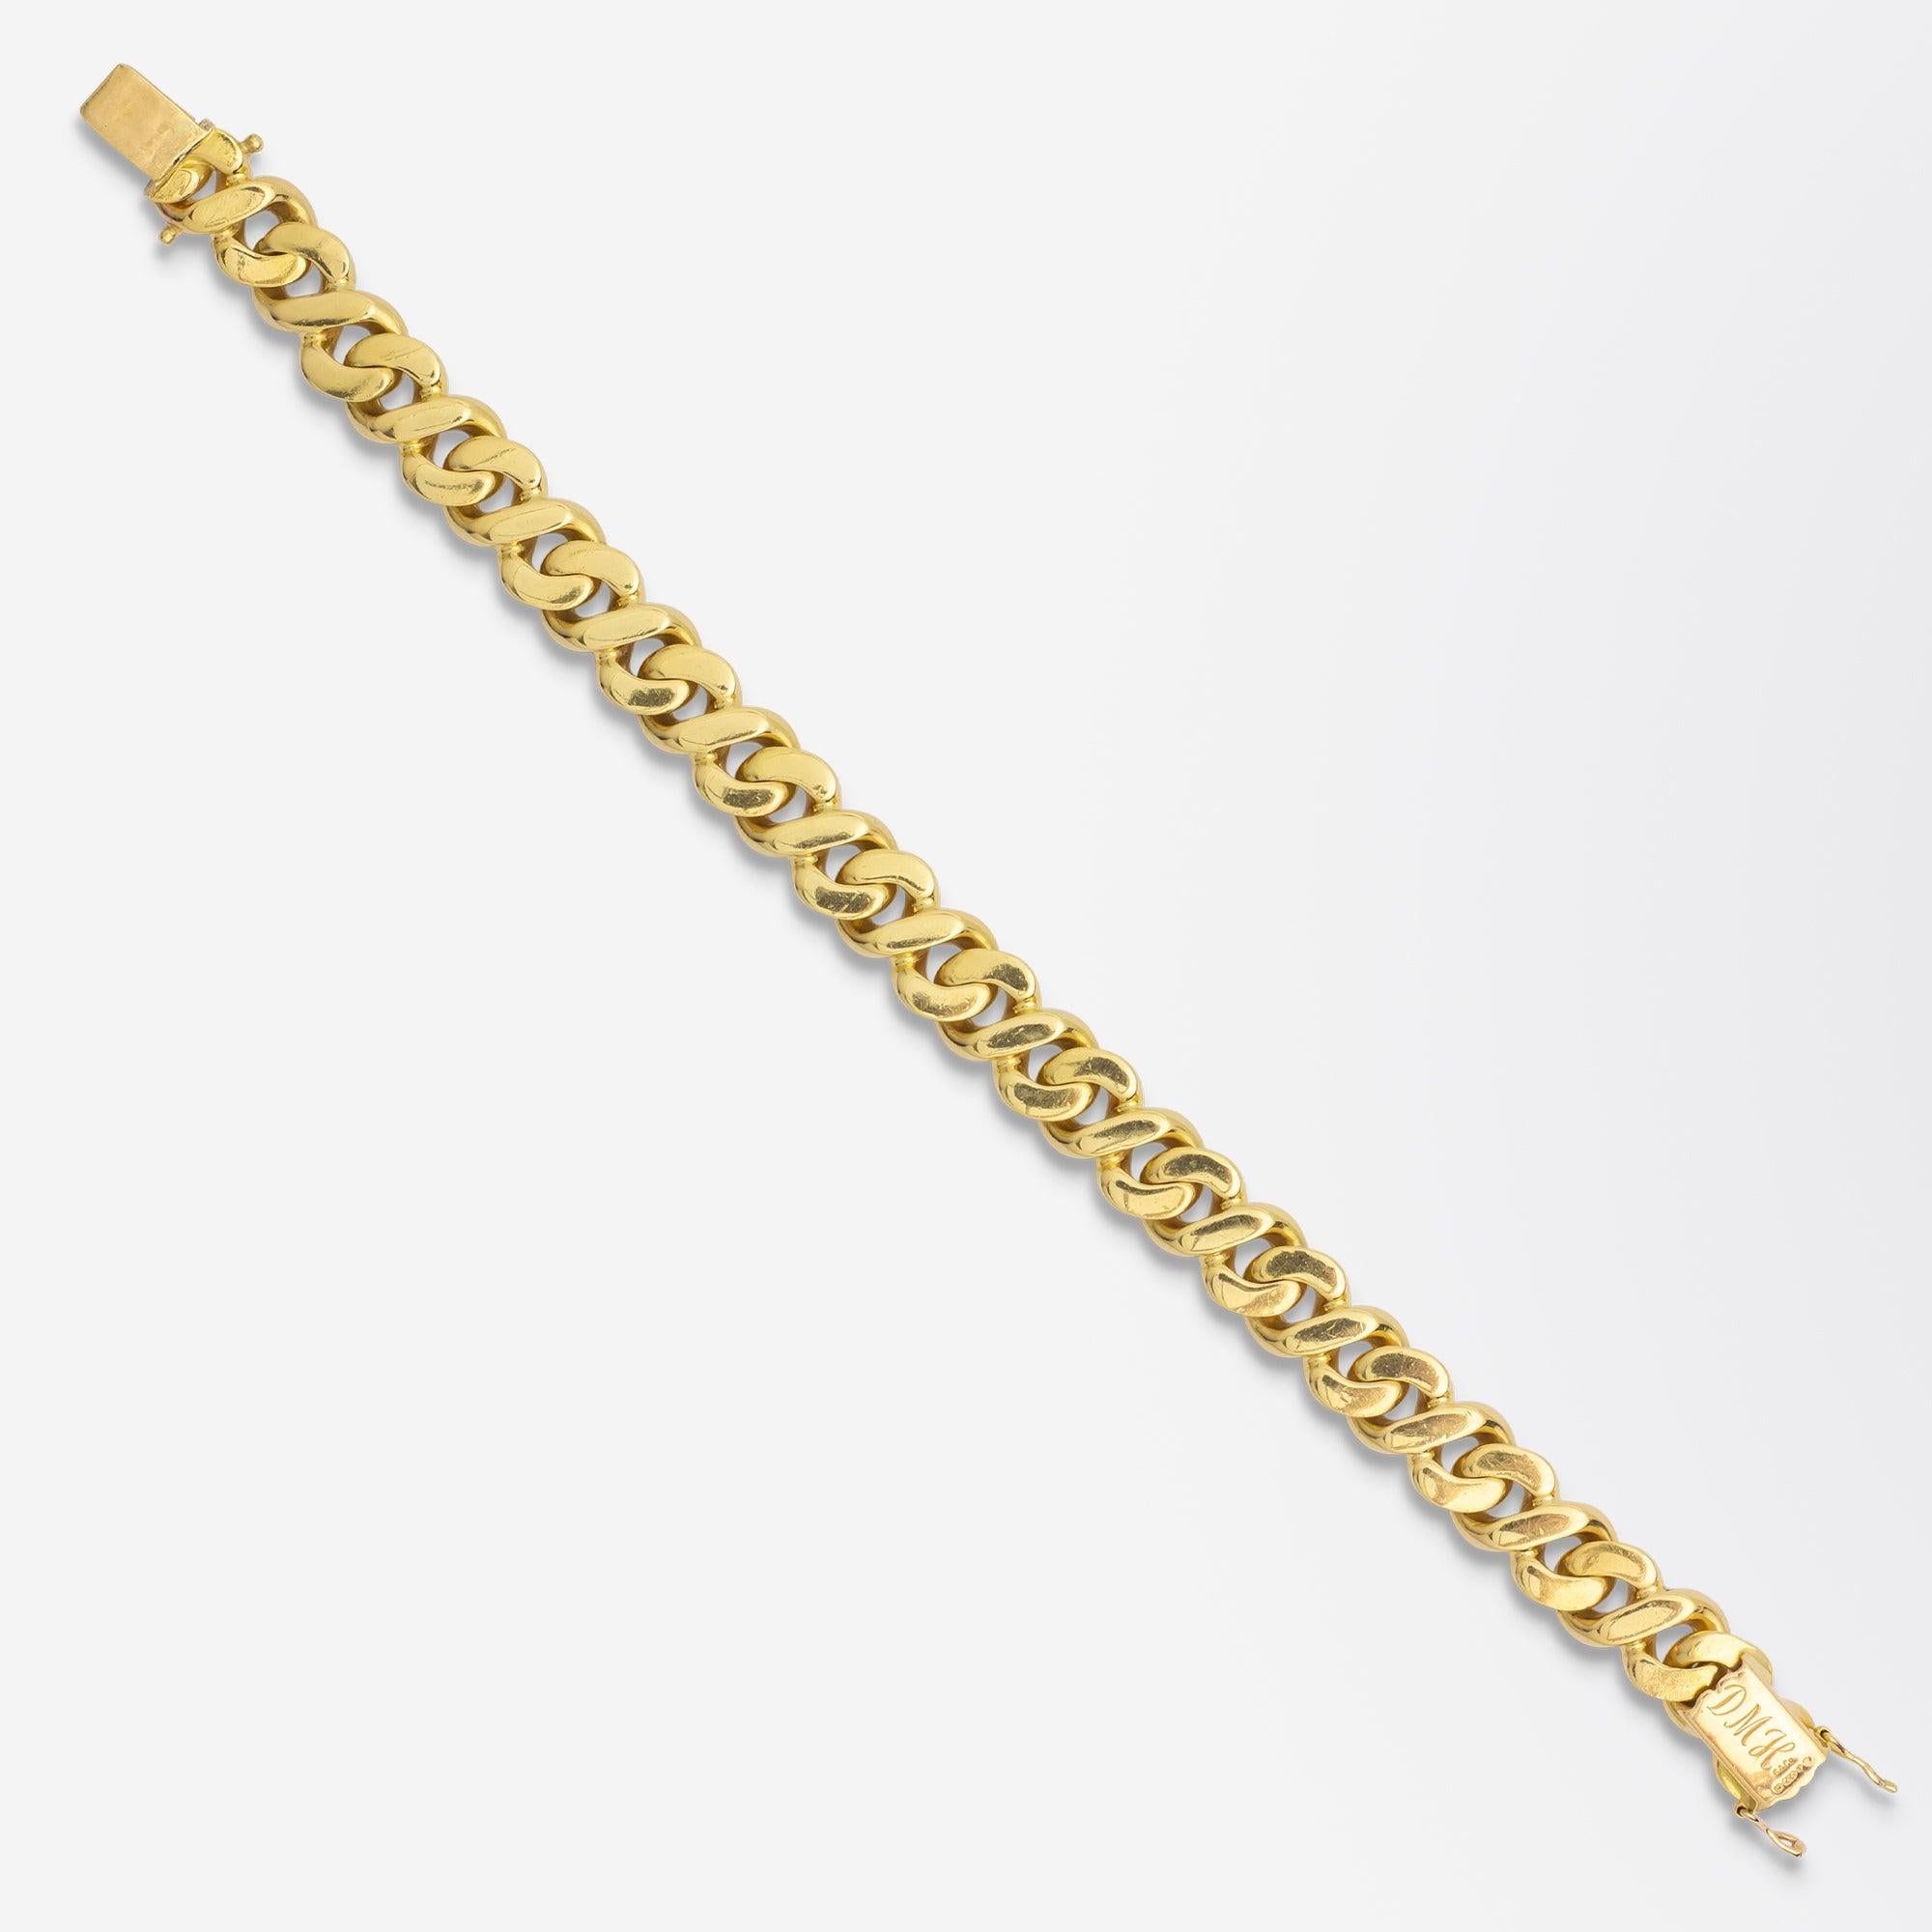 A substantial gold bracelet in 18 karat yellow gold crafted by Garrard of London. The figure of 8 link piece has got a good weight and features a tongue and box clasp with two separate safety catches. The bracelet contains hallmarks to the clasp for